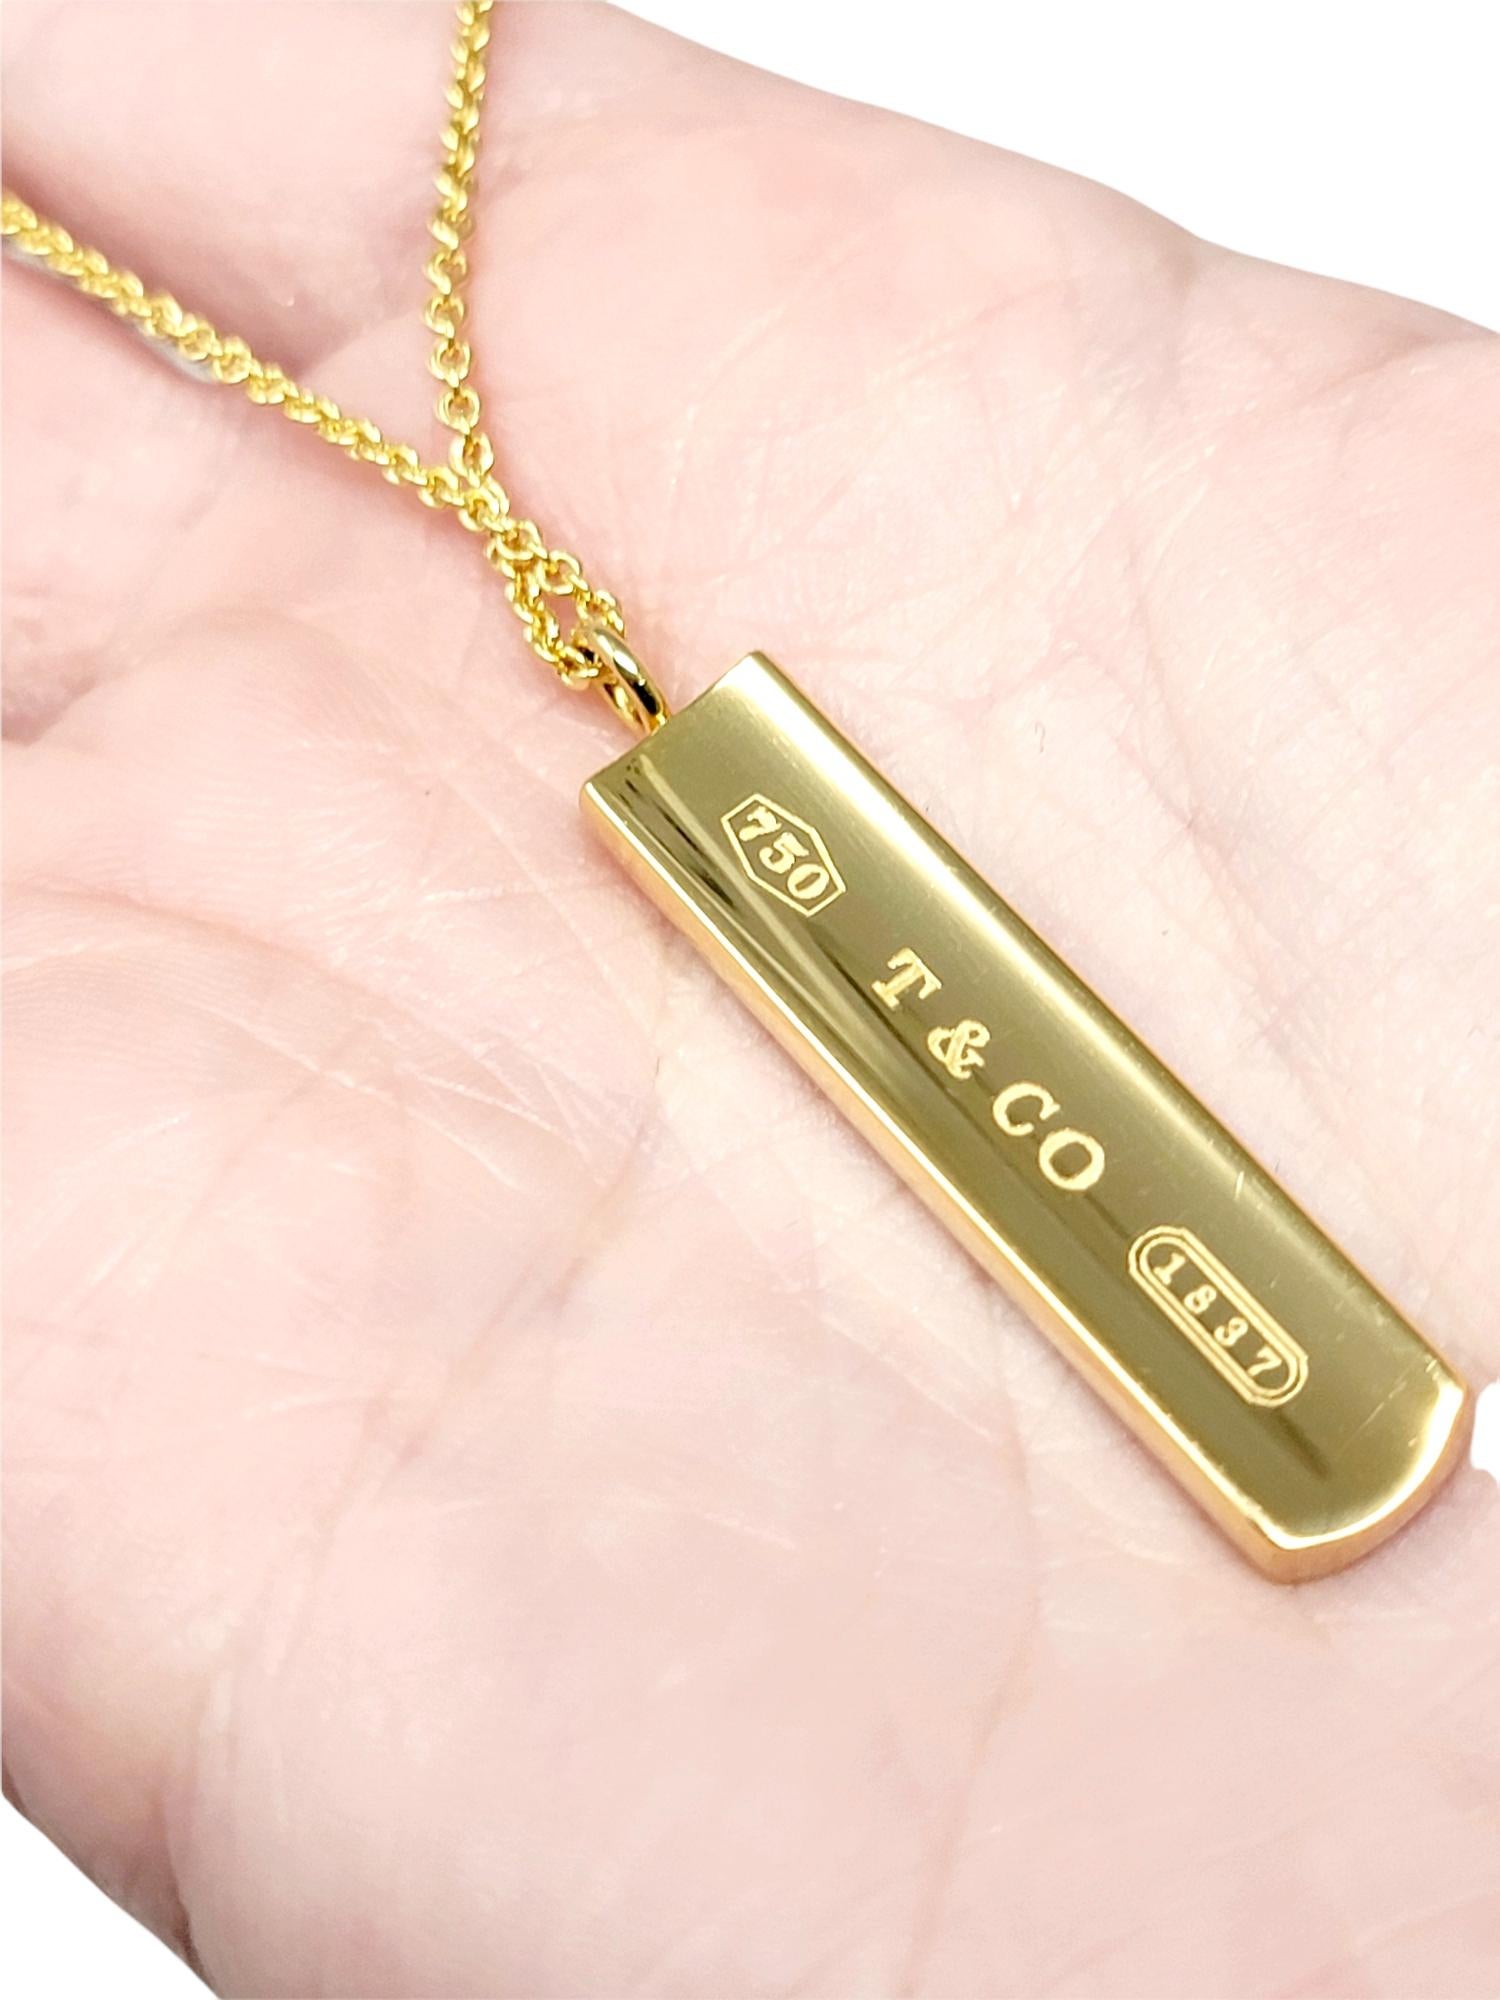 Contemporary Tiffany & Co. 1837 Vertical Bar Pendant Necklace in 18 Karat Yellow Gold